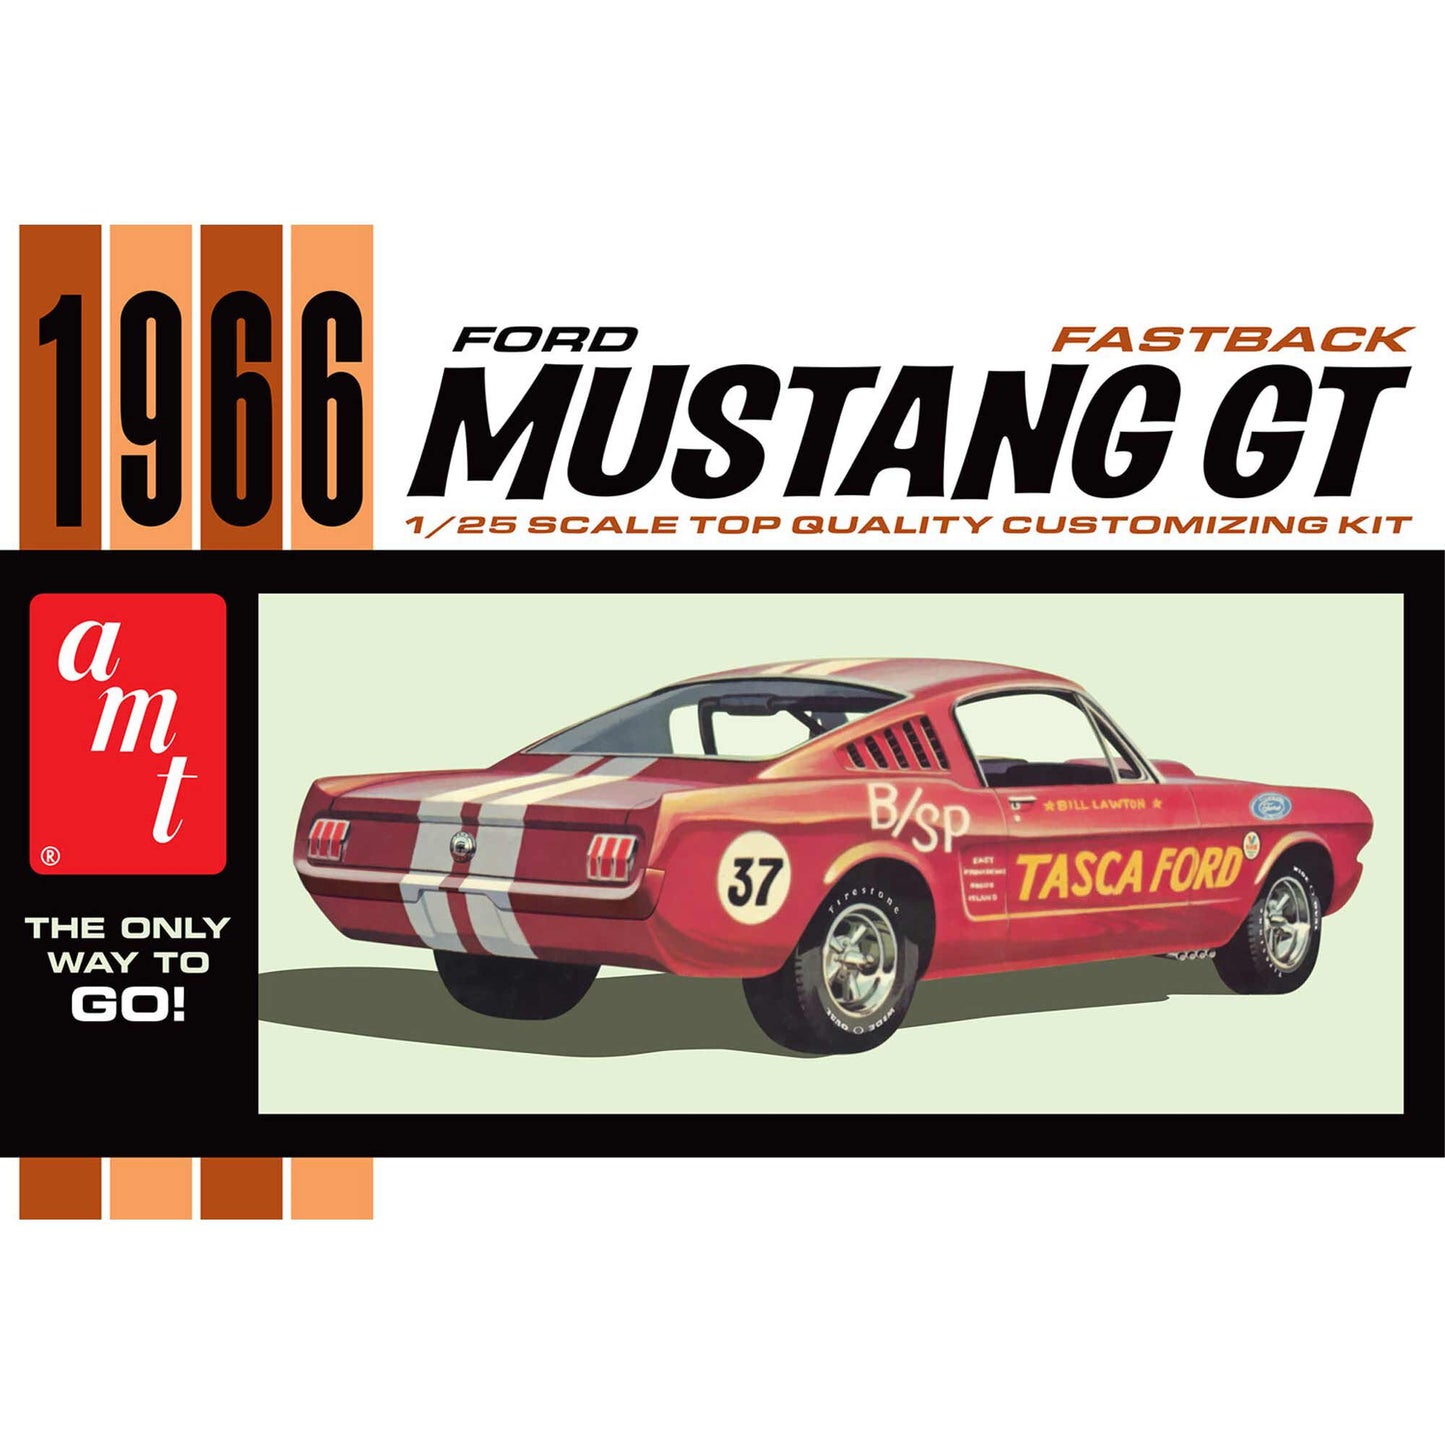 1966 Ford Mustang Fastback 2+2, 1/25th